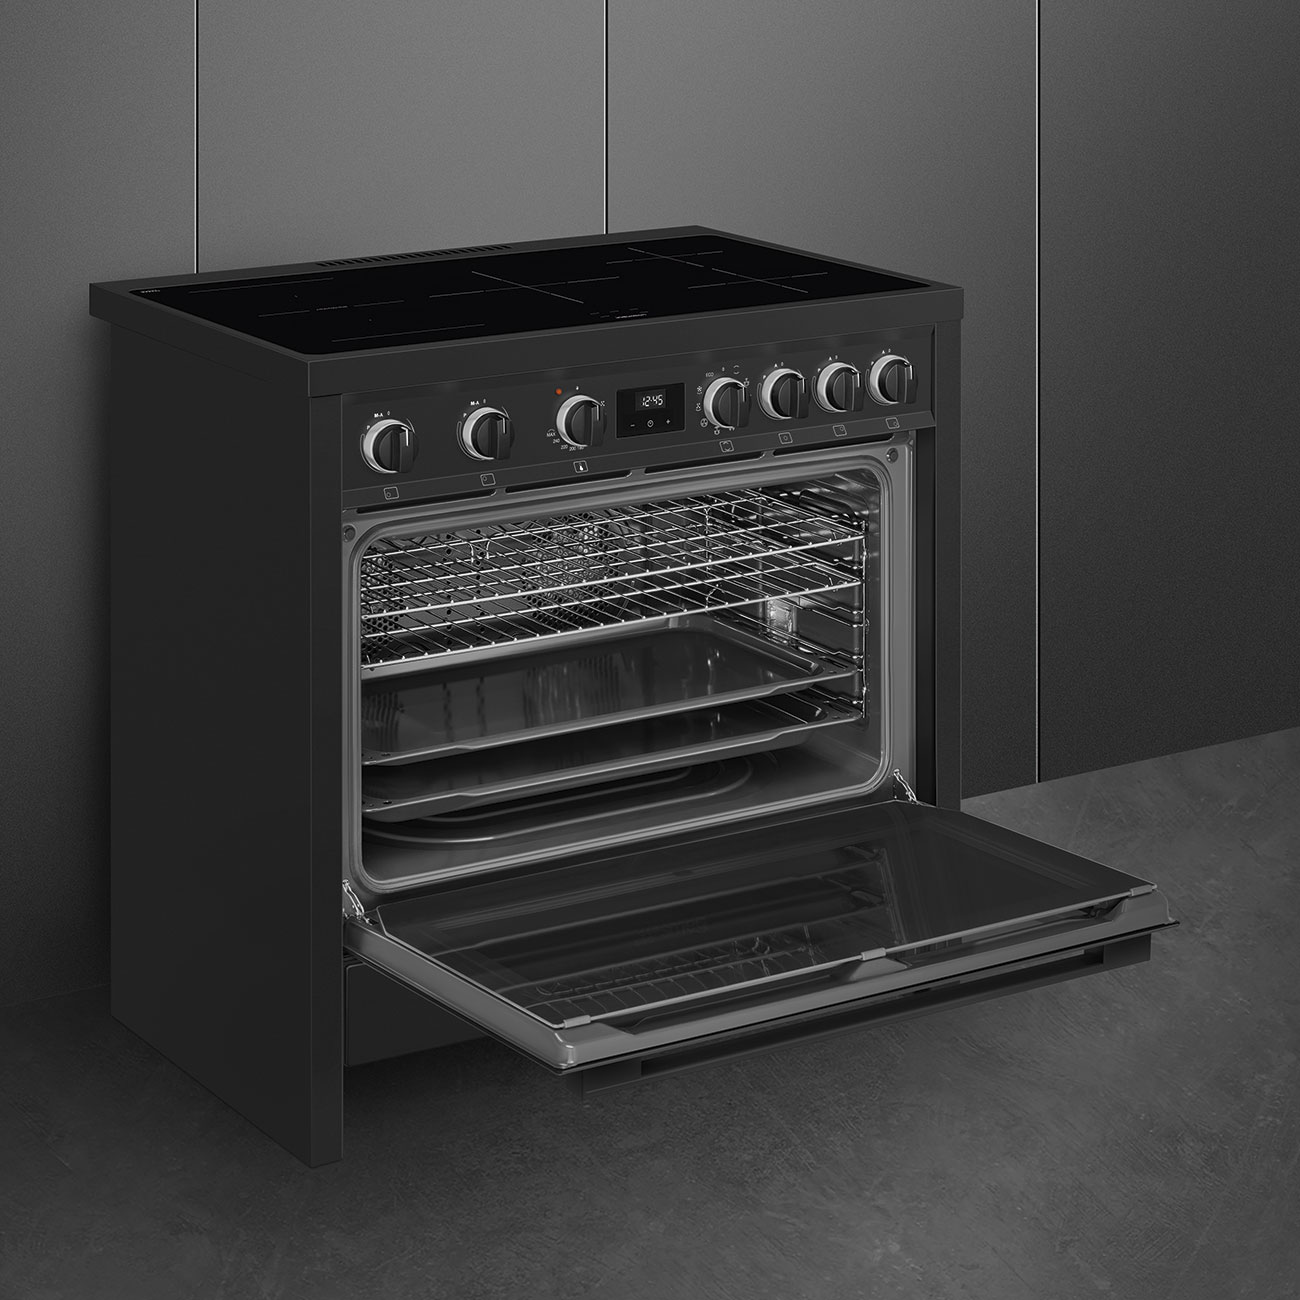 Smeg Anthracite Cooker with Induction Hob_4